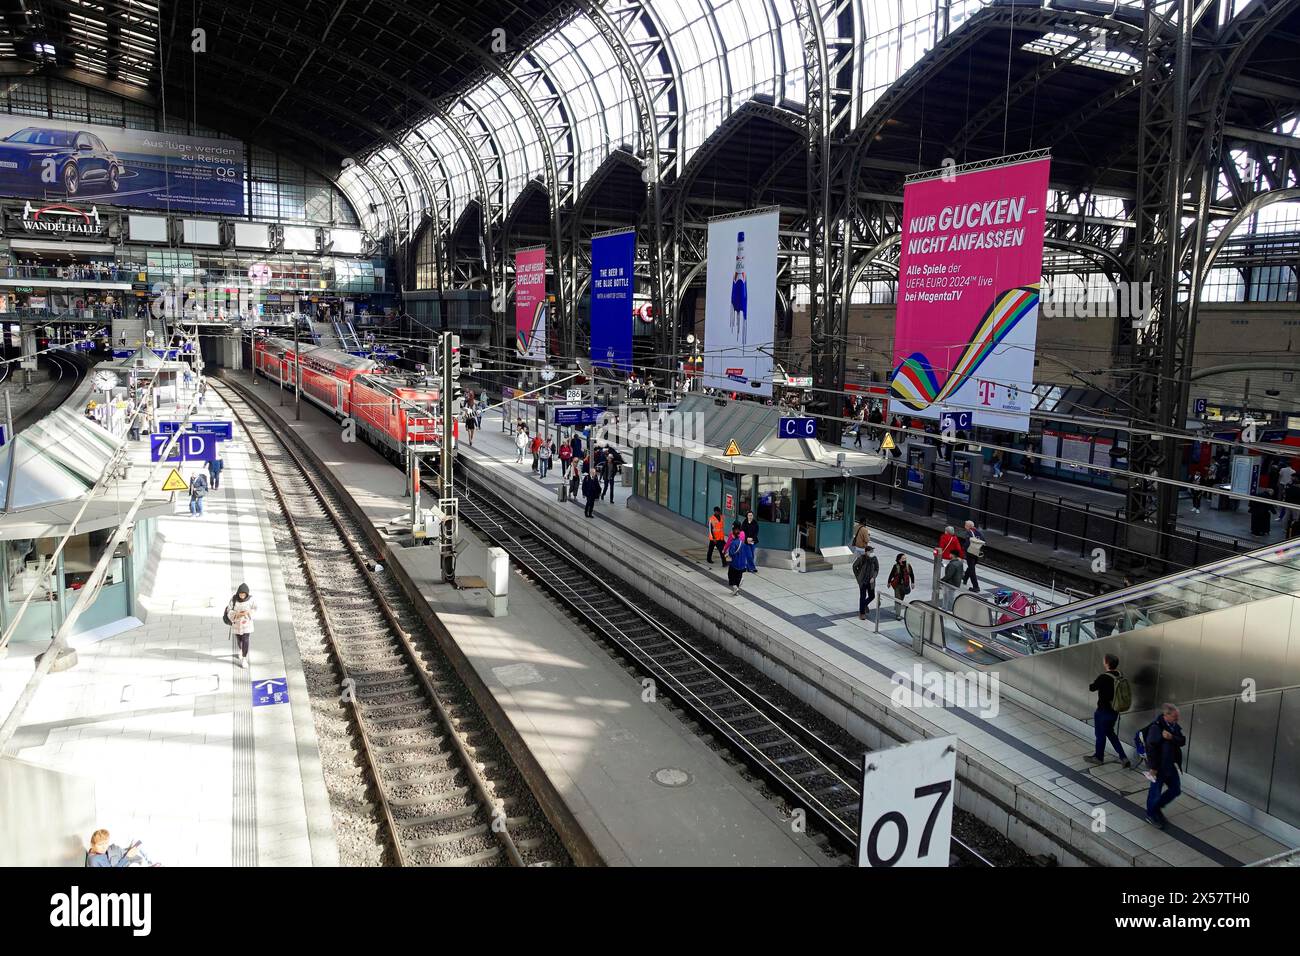 Hamburg Central Station, Hamburg, Germany, Europe, View of a station concourse with trains and travellers at different platforms under a large arch Stock Photo